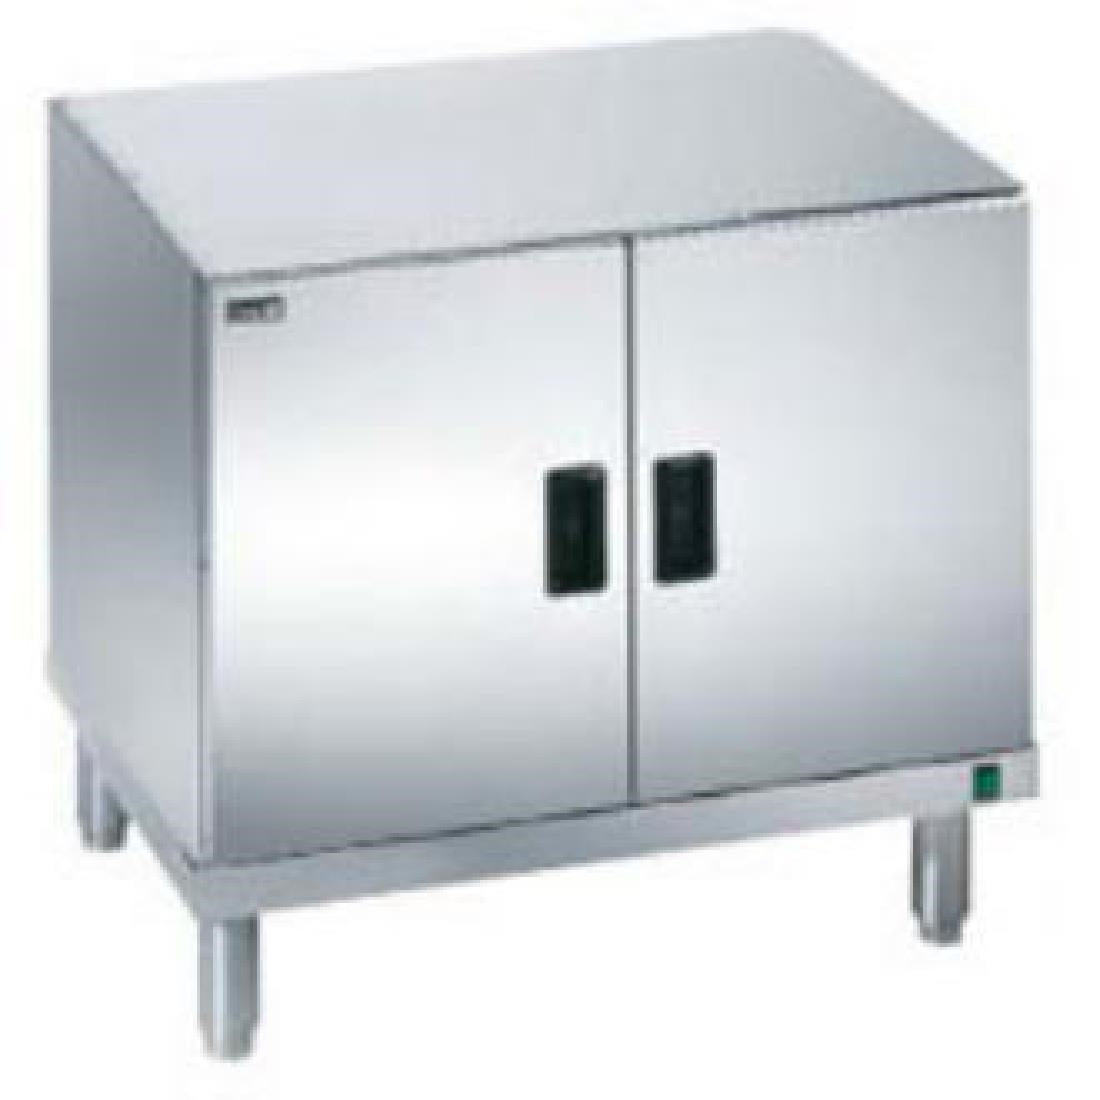 E400 HCL7 - Lincat Silverlink 600 Free-standing Heated Pedestal with Legs and Doors - W 750 mm - 0.75 kW JD Catering Equipment Solutions Ltd